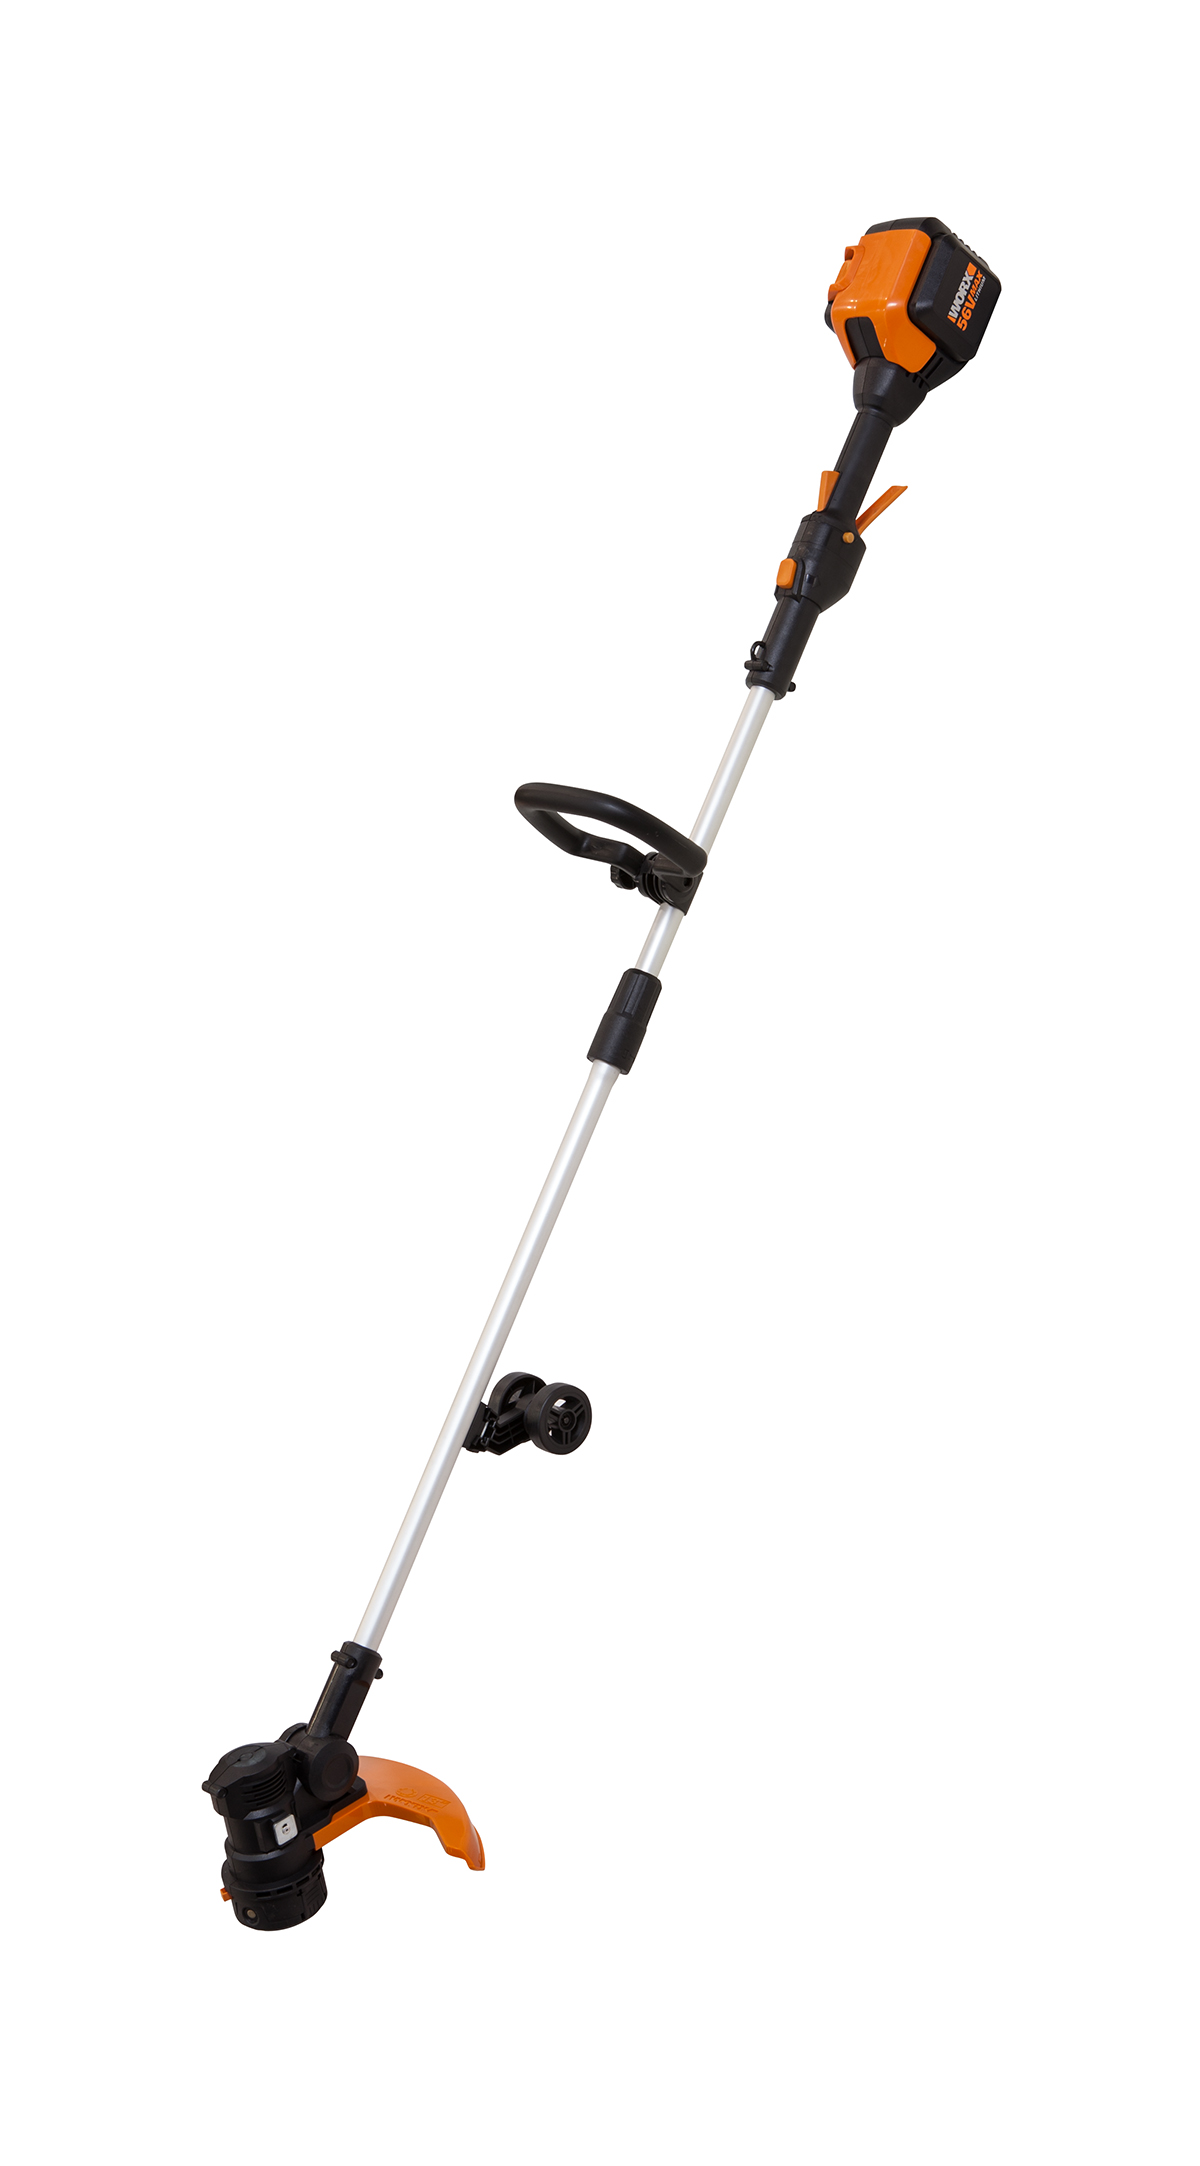 WORX Launches Power Share Program with New 56-volt Cordless Grass ...